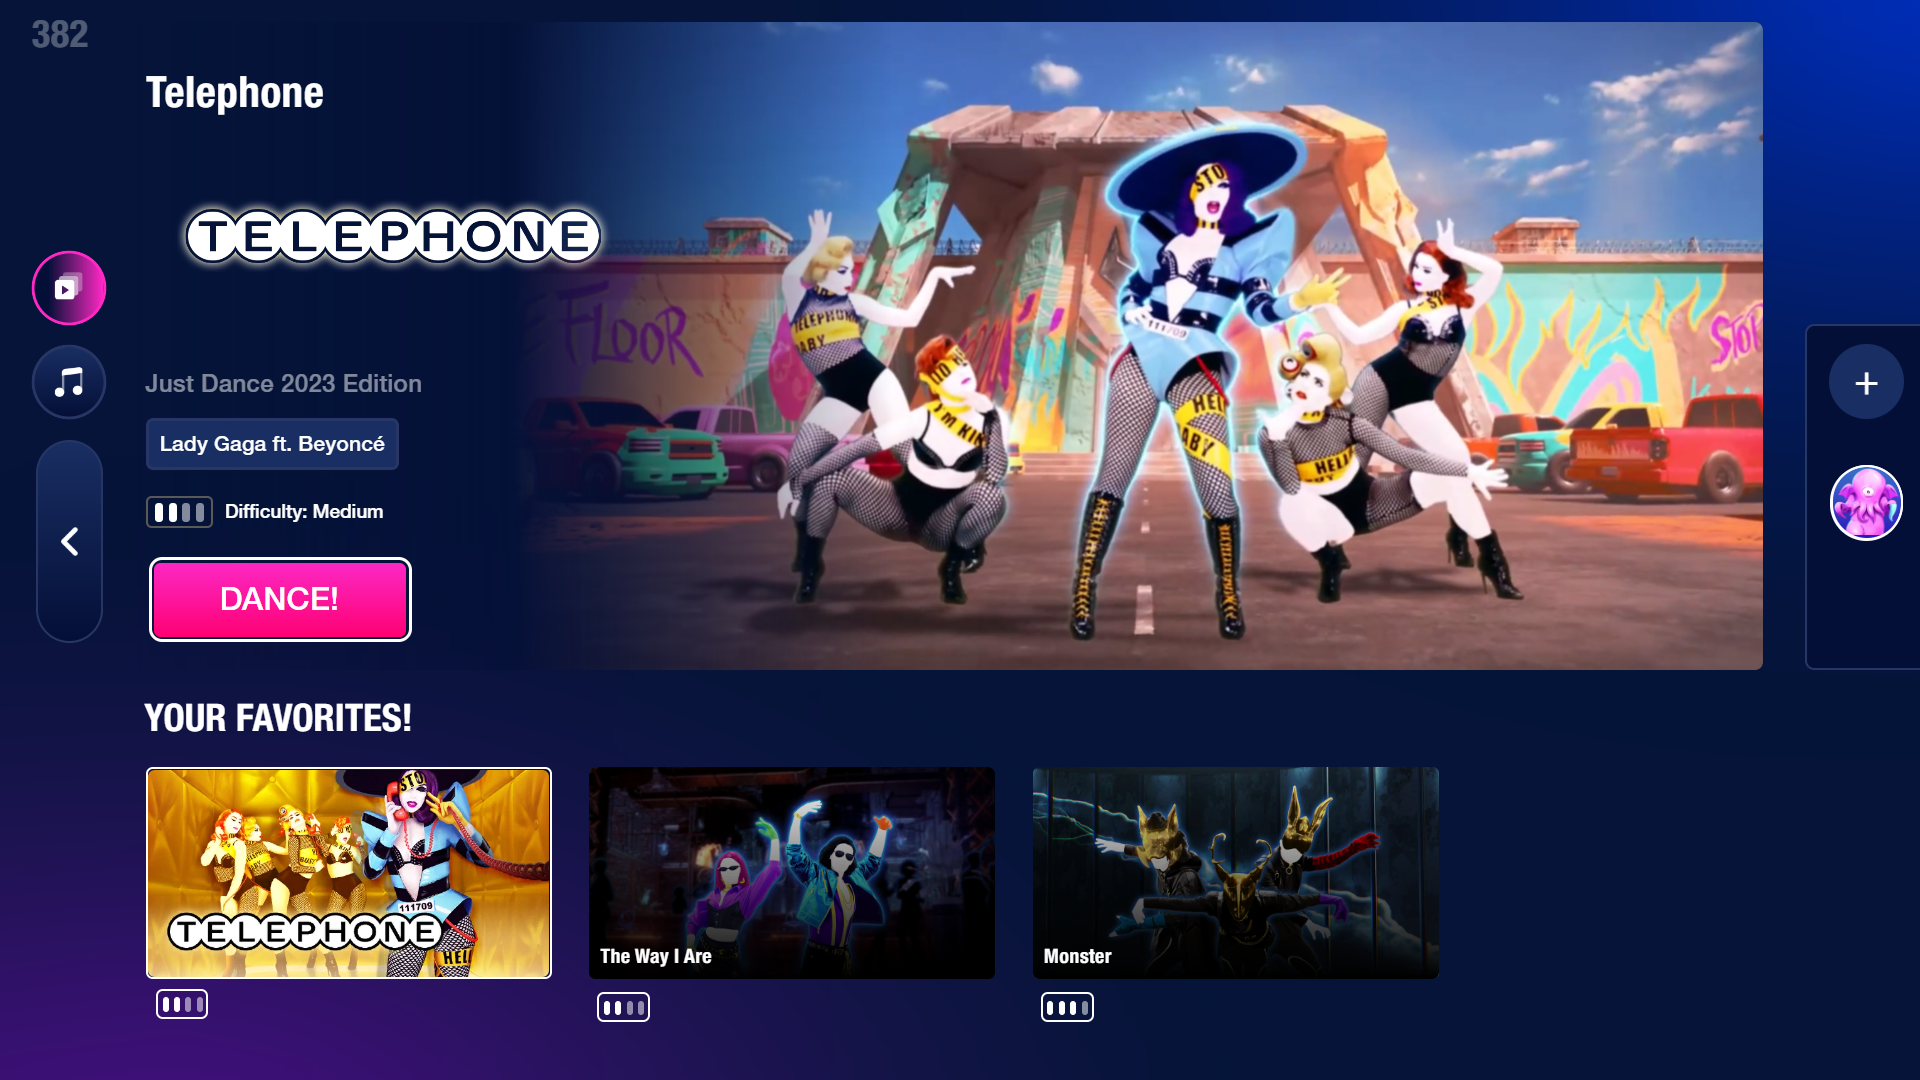 Just Dance 2023 Edition Style - MENU ASSETS IS (semi) REQUIRED